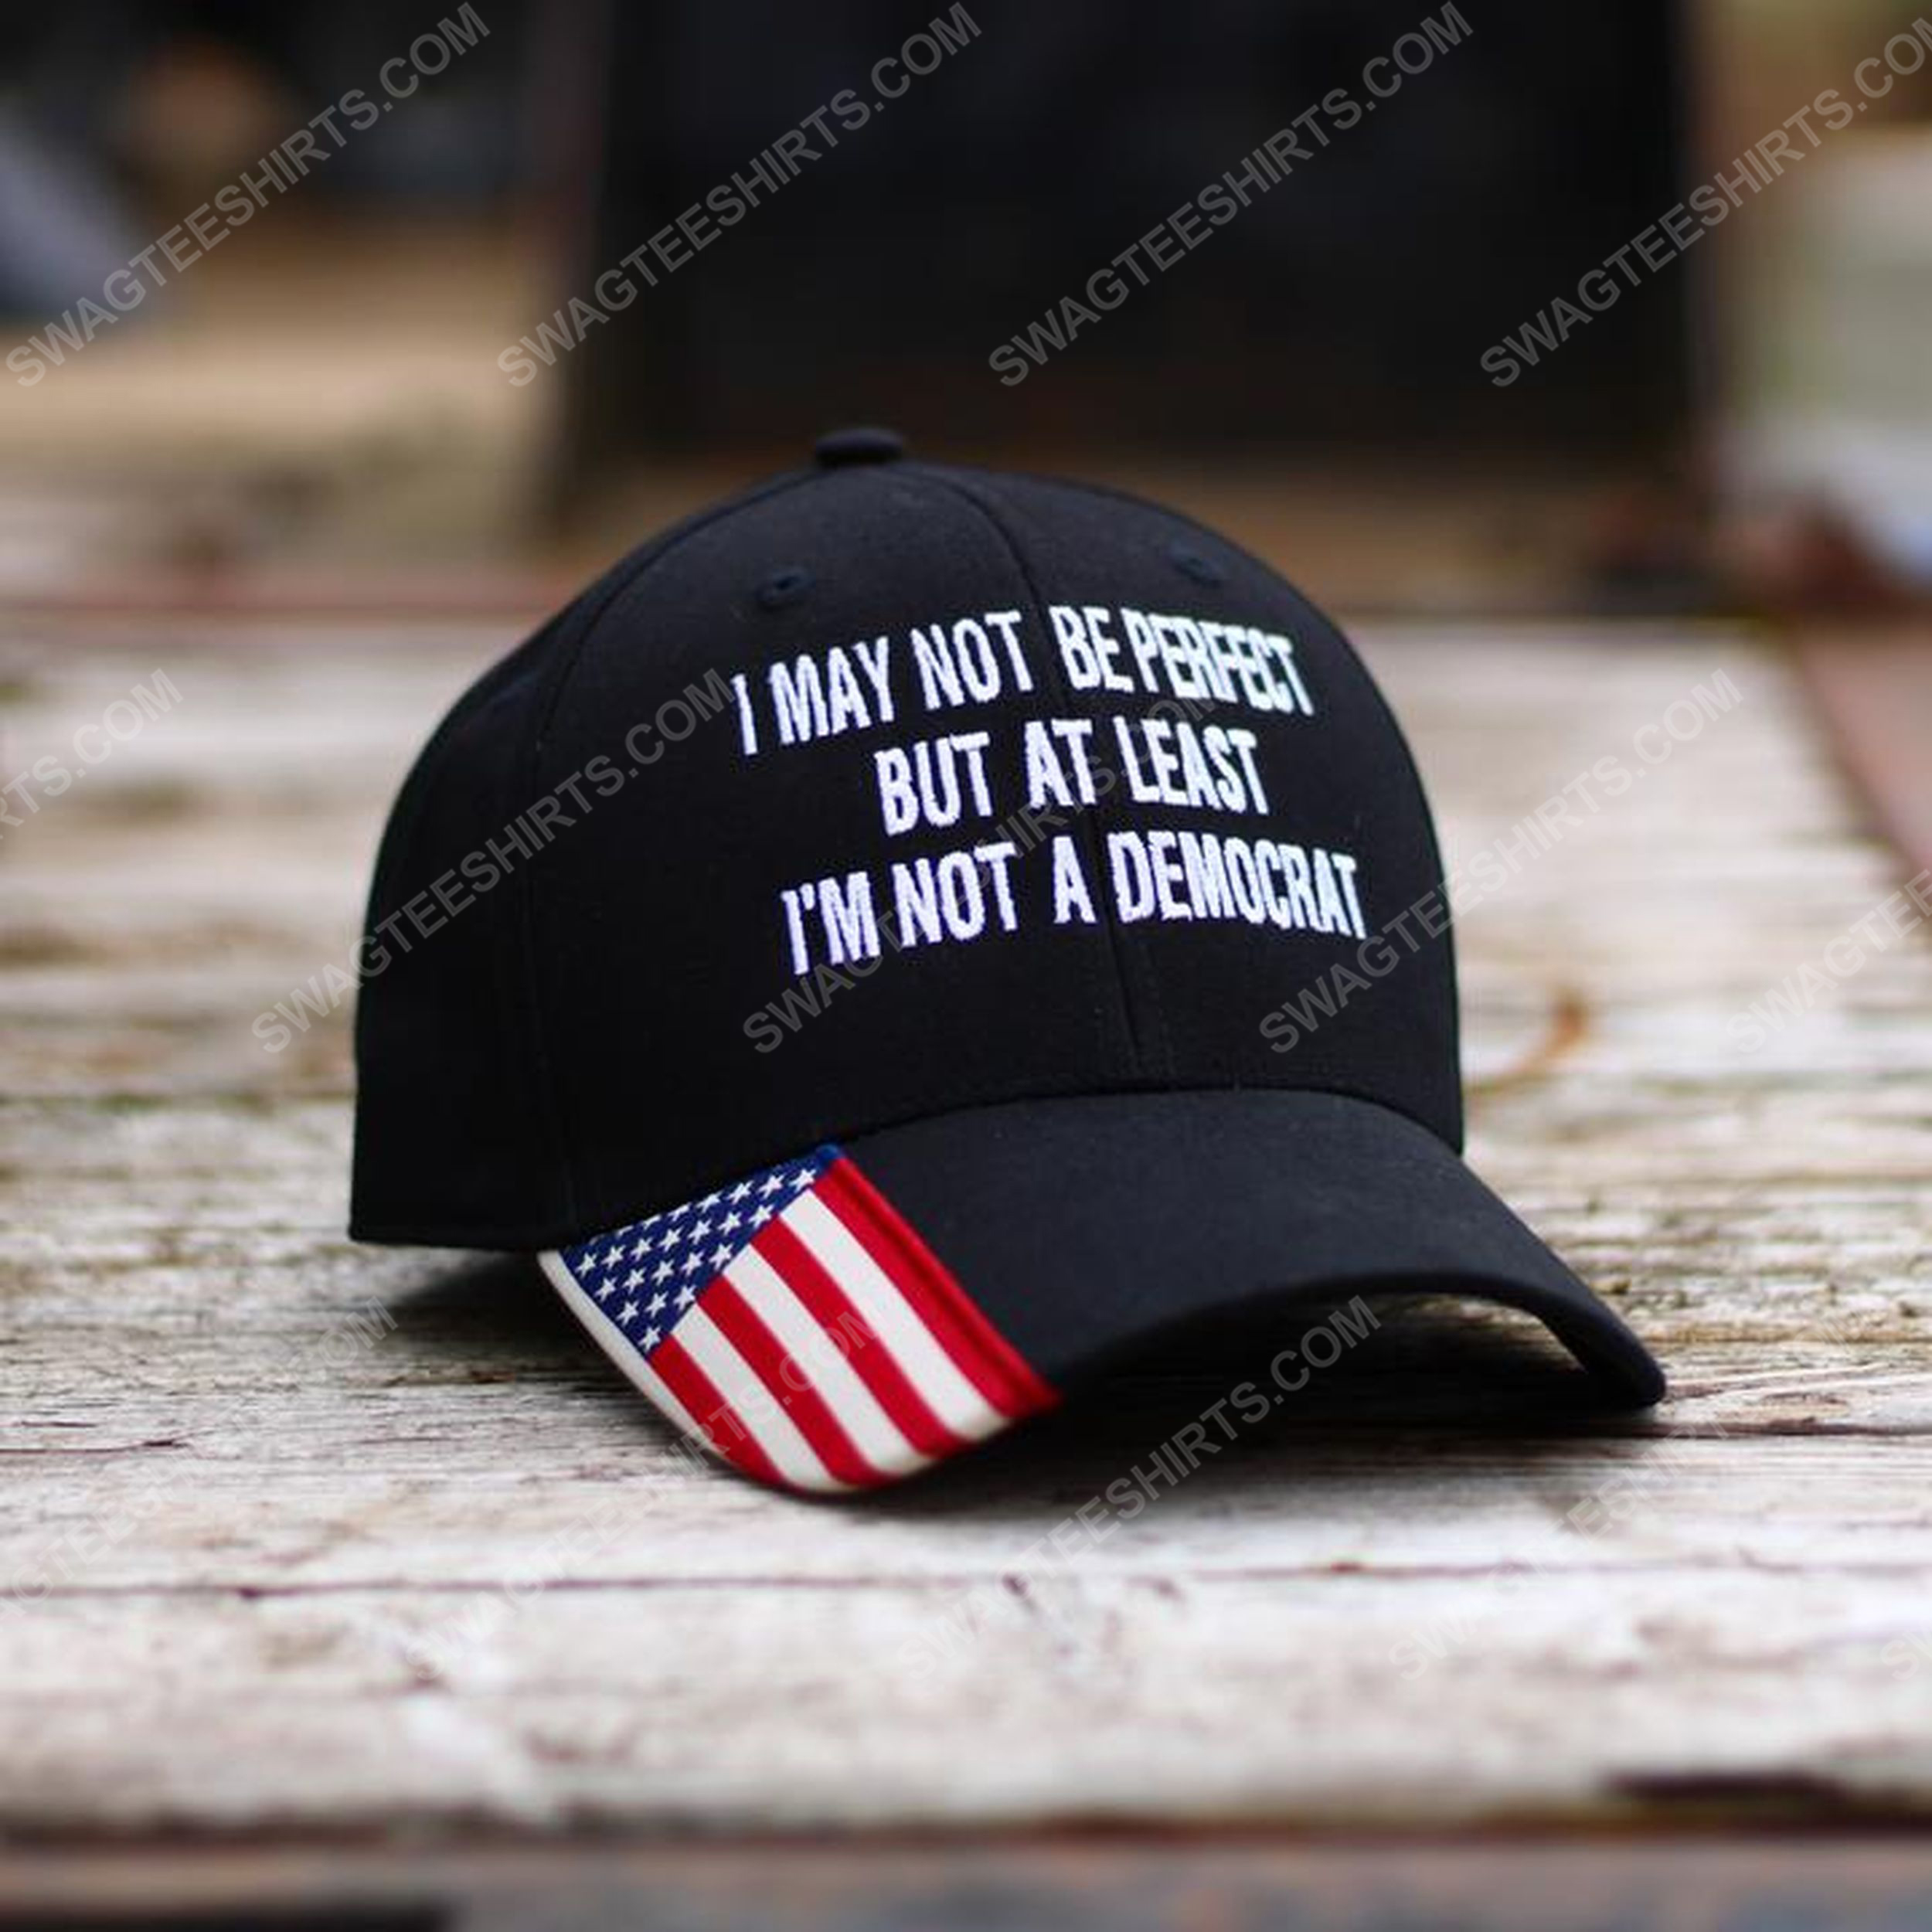 I may not be perfect but at least i'm not a democrat american flag full print classic hat 1 - Copy (2)